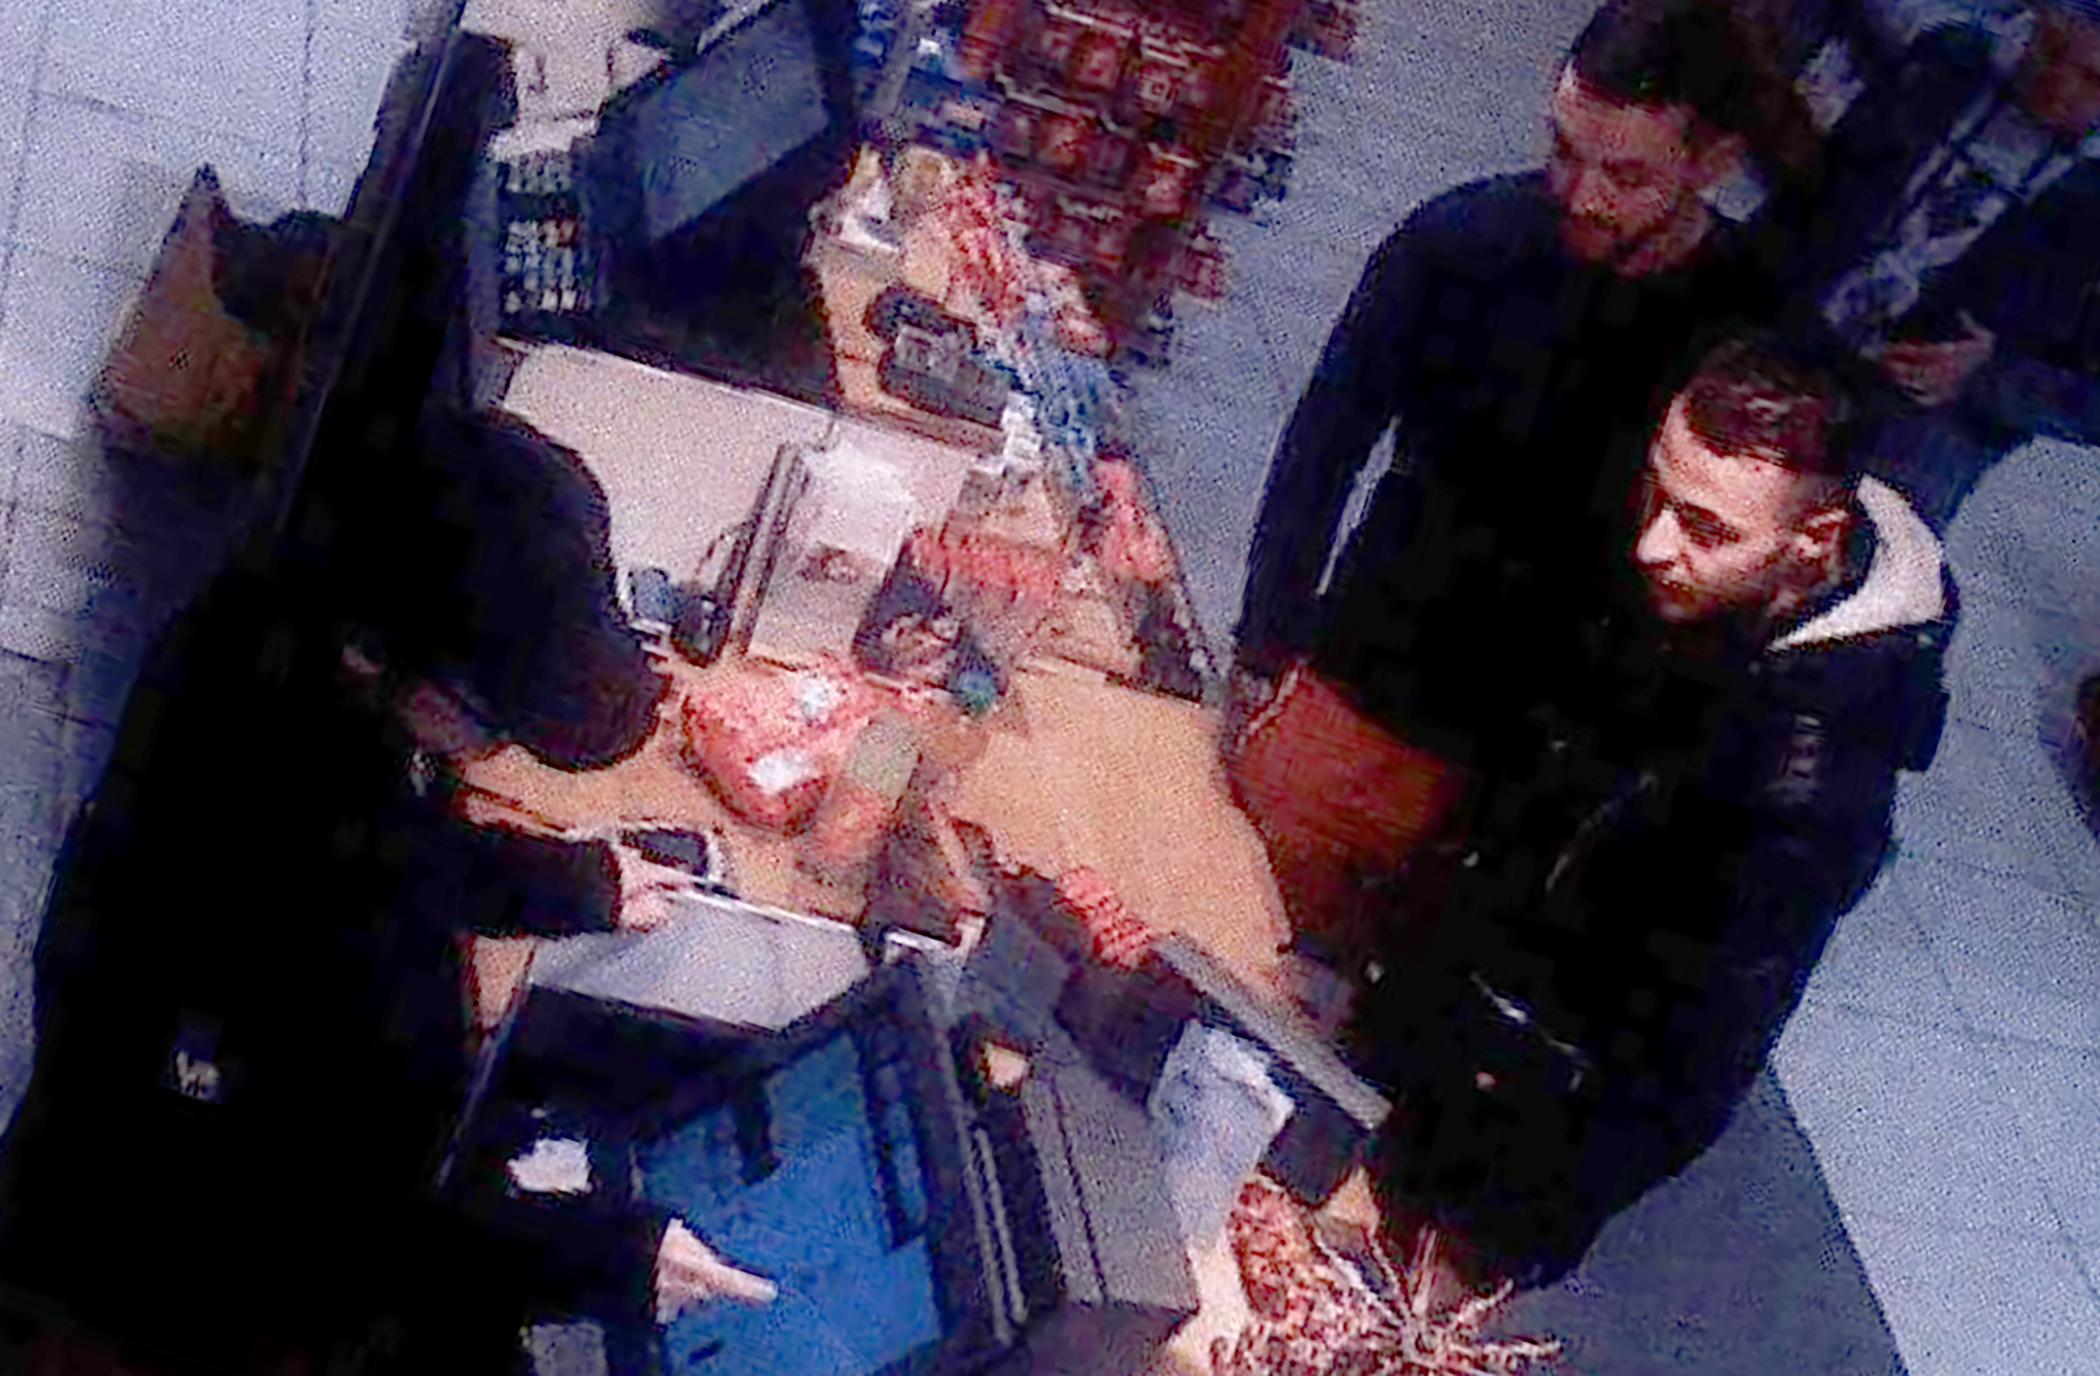 PHOTO: An image taken from a CCTV camera at a petrol station north of Paris, on Nov. 11, 2015 shows Salah Abdeslam a suspect in the Paris attack of November 13, and Mohamed Abrini buying goods.